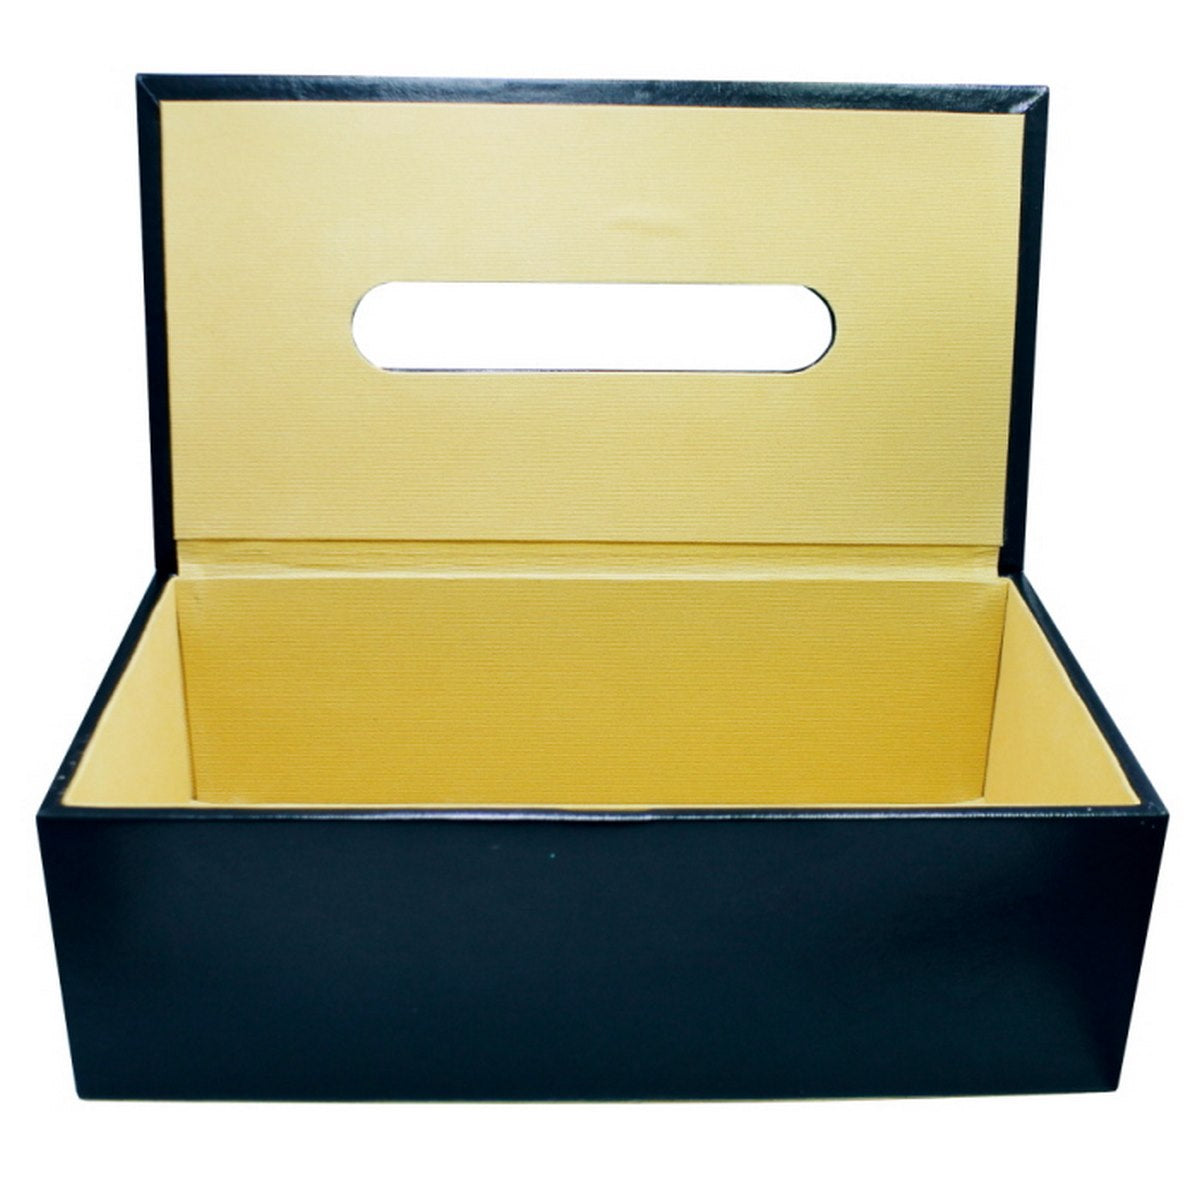 Premium Leather Tissue Paper Holder - For Office Use, Personal Use, Corporate Gifting, Return Gift JATBLMBK